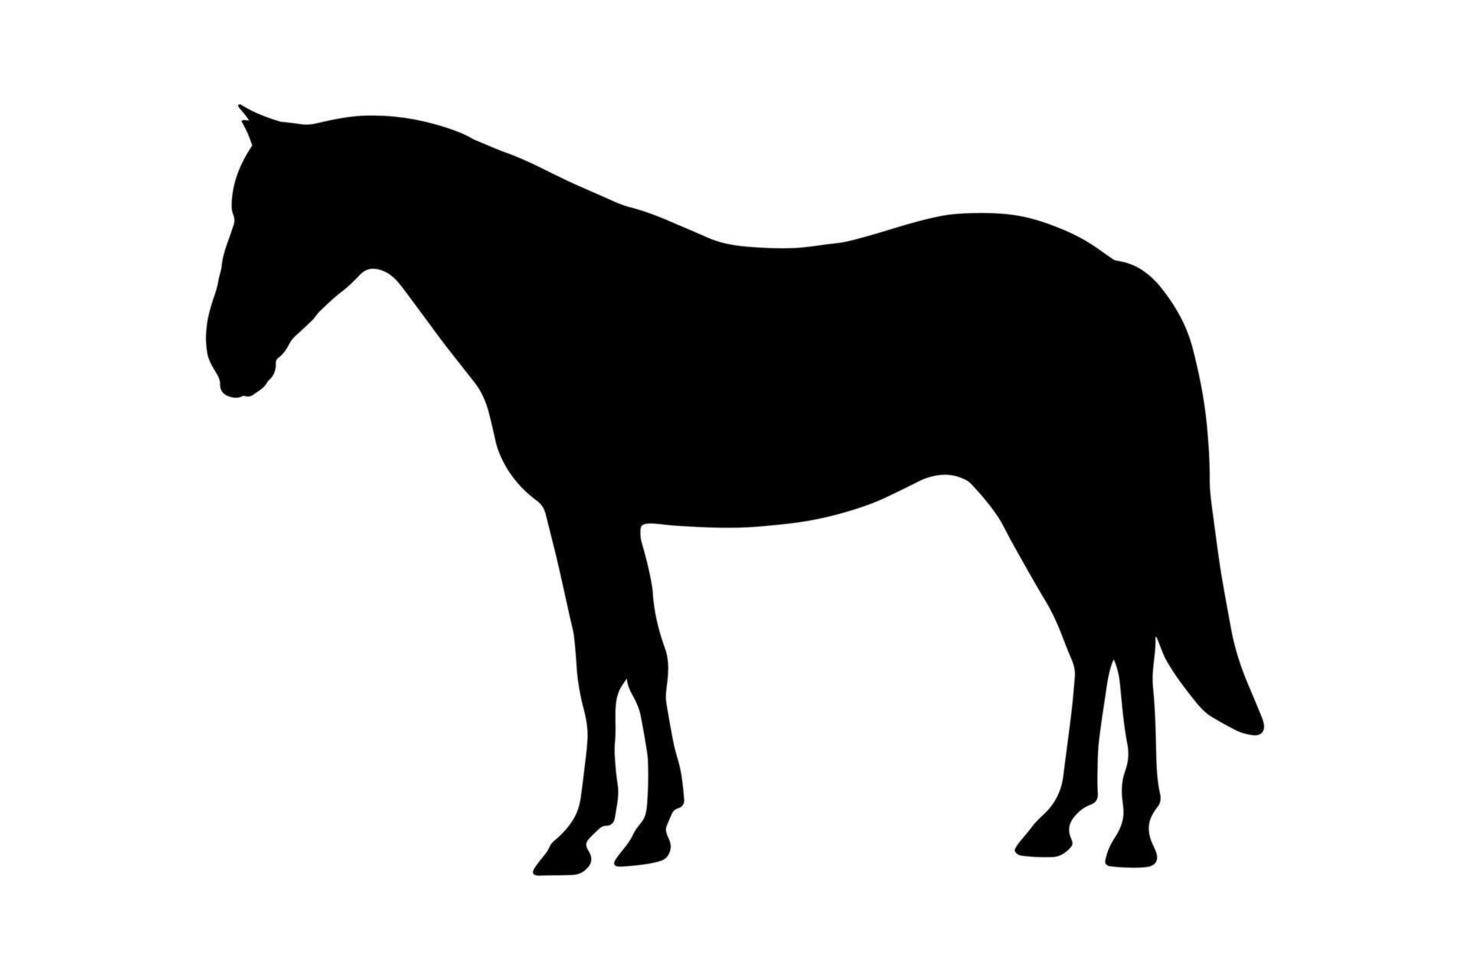 Horse animal silhouette shadow shape isolated on white background. Black simple emblem. vector